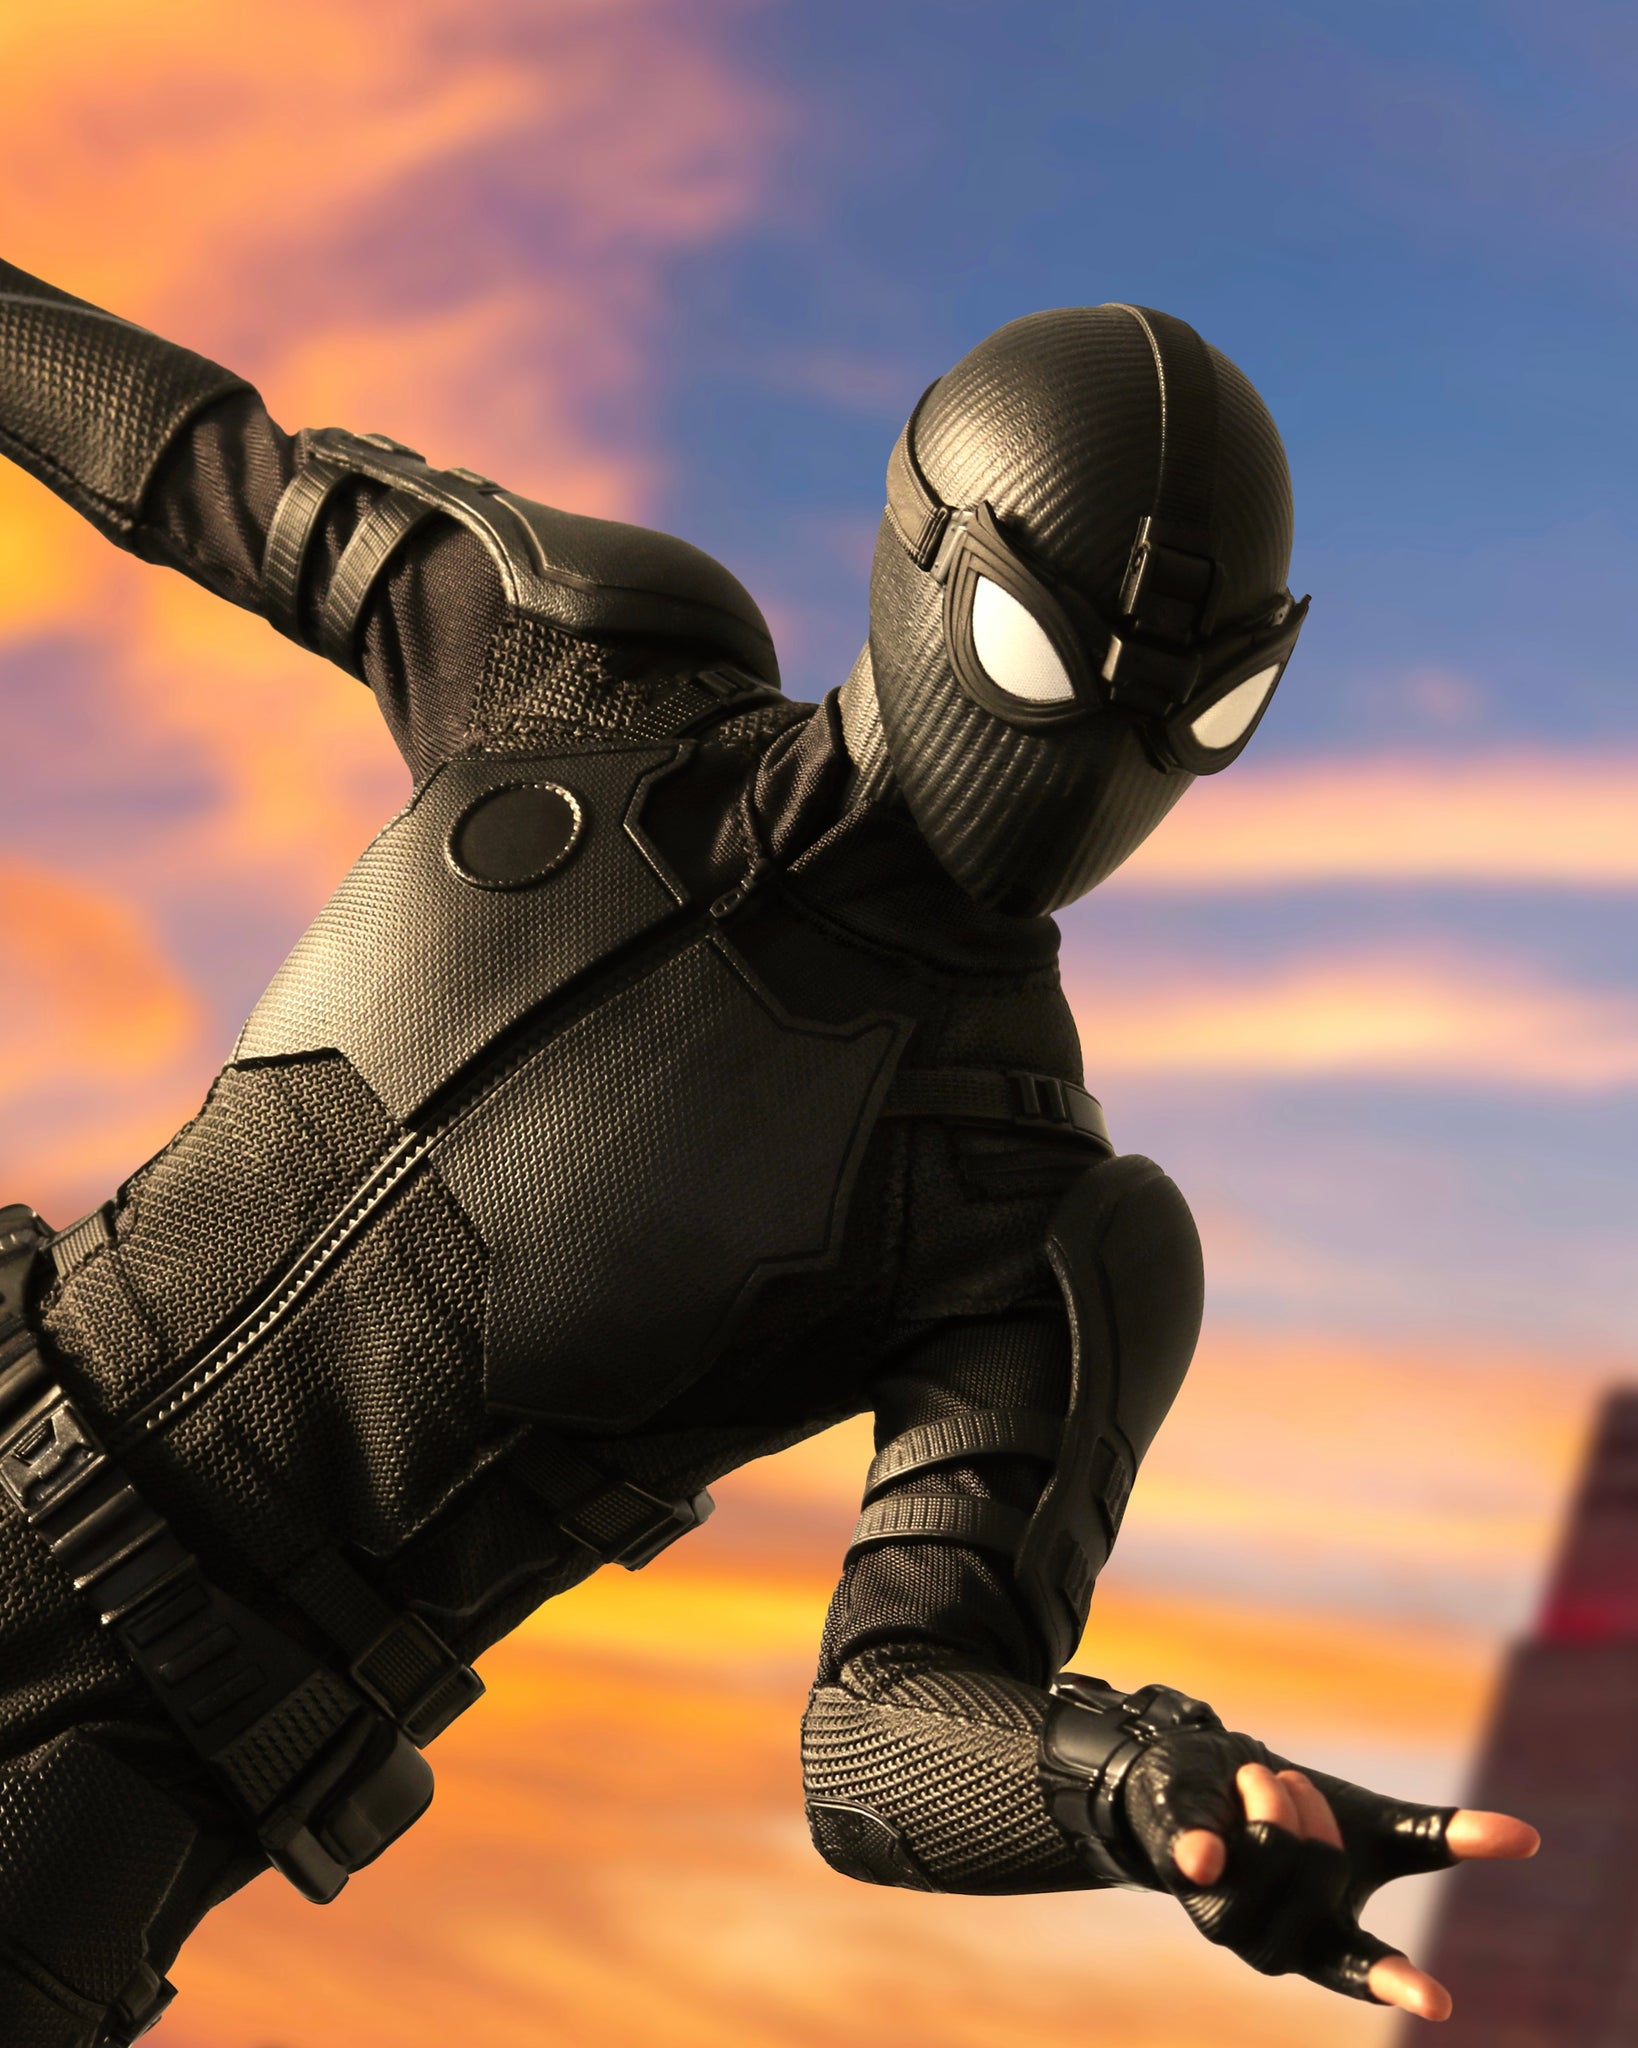  Spider-Man: Far from Home Concept Series Stealth Suit